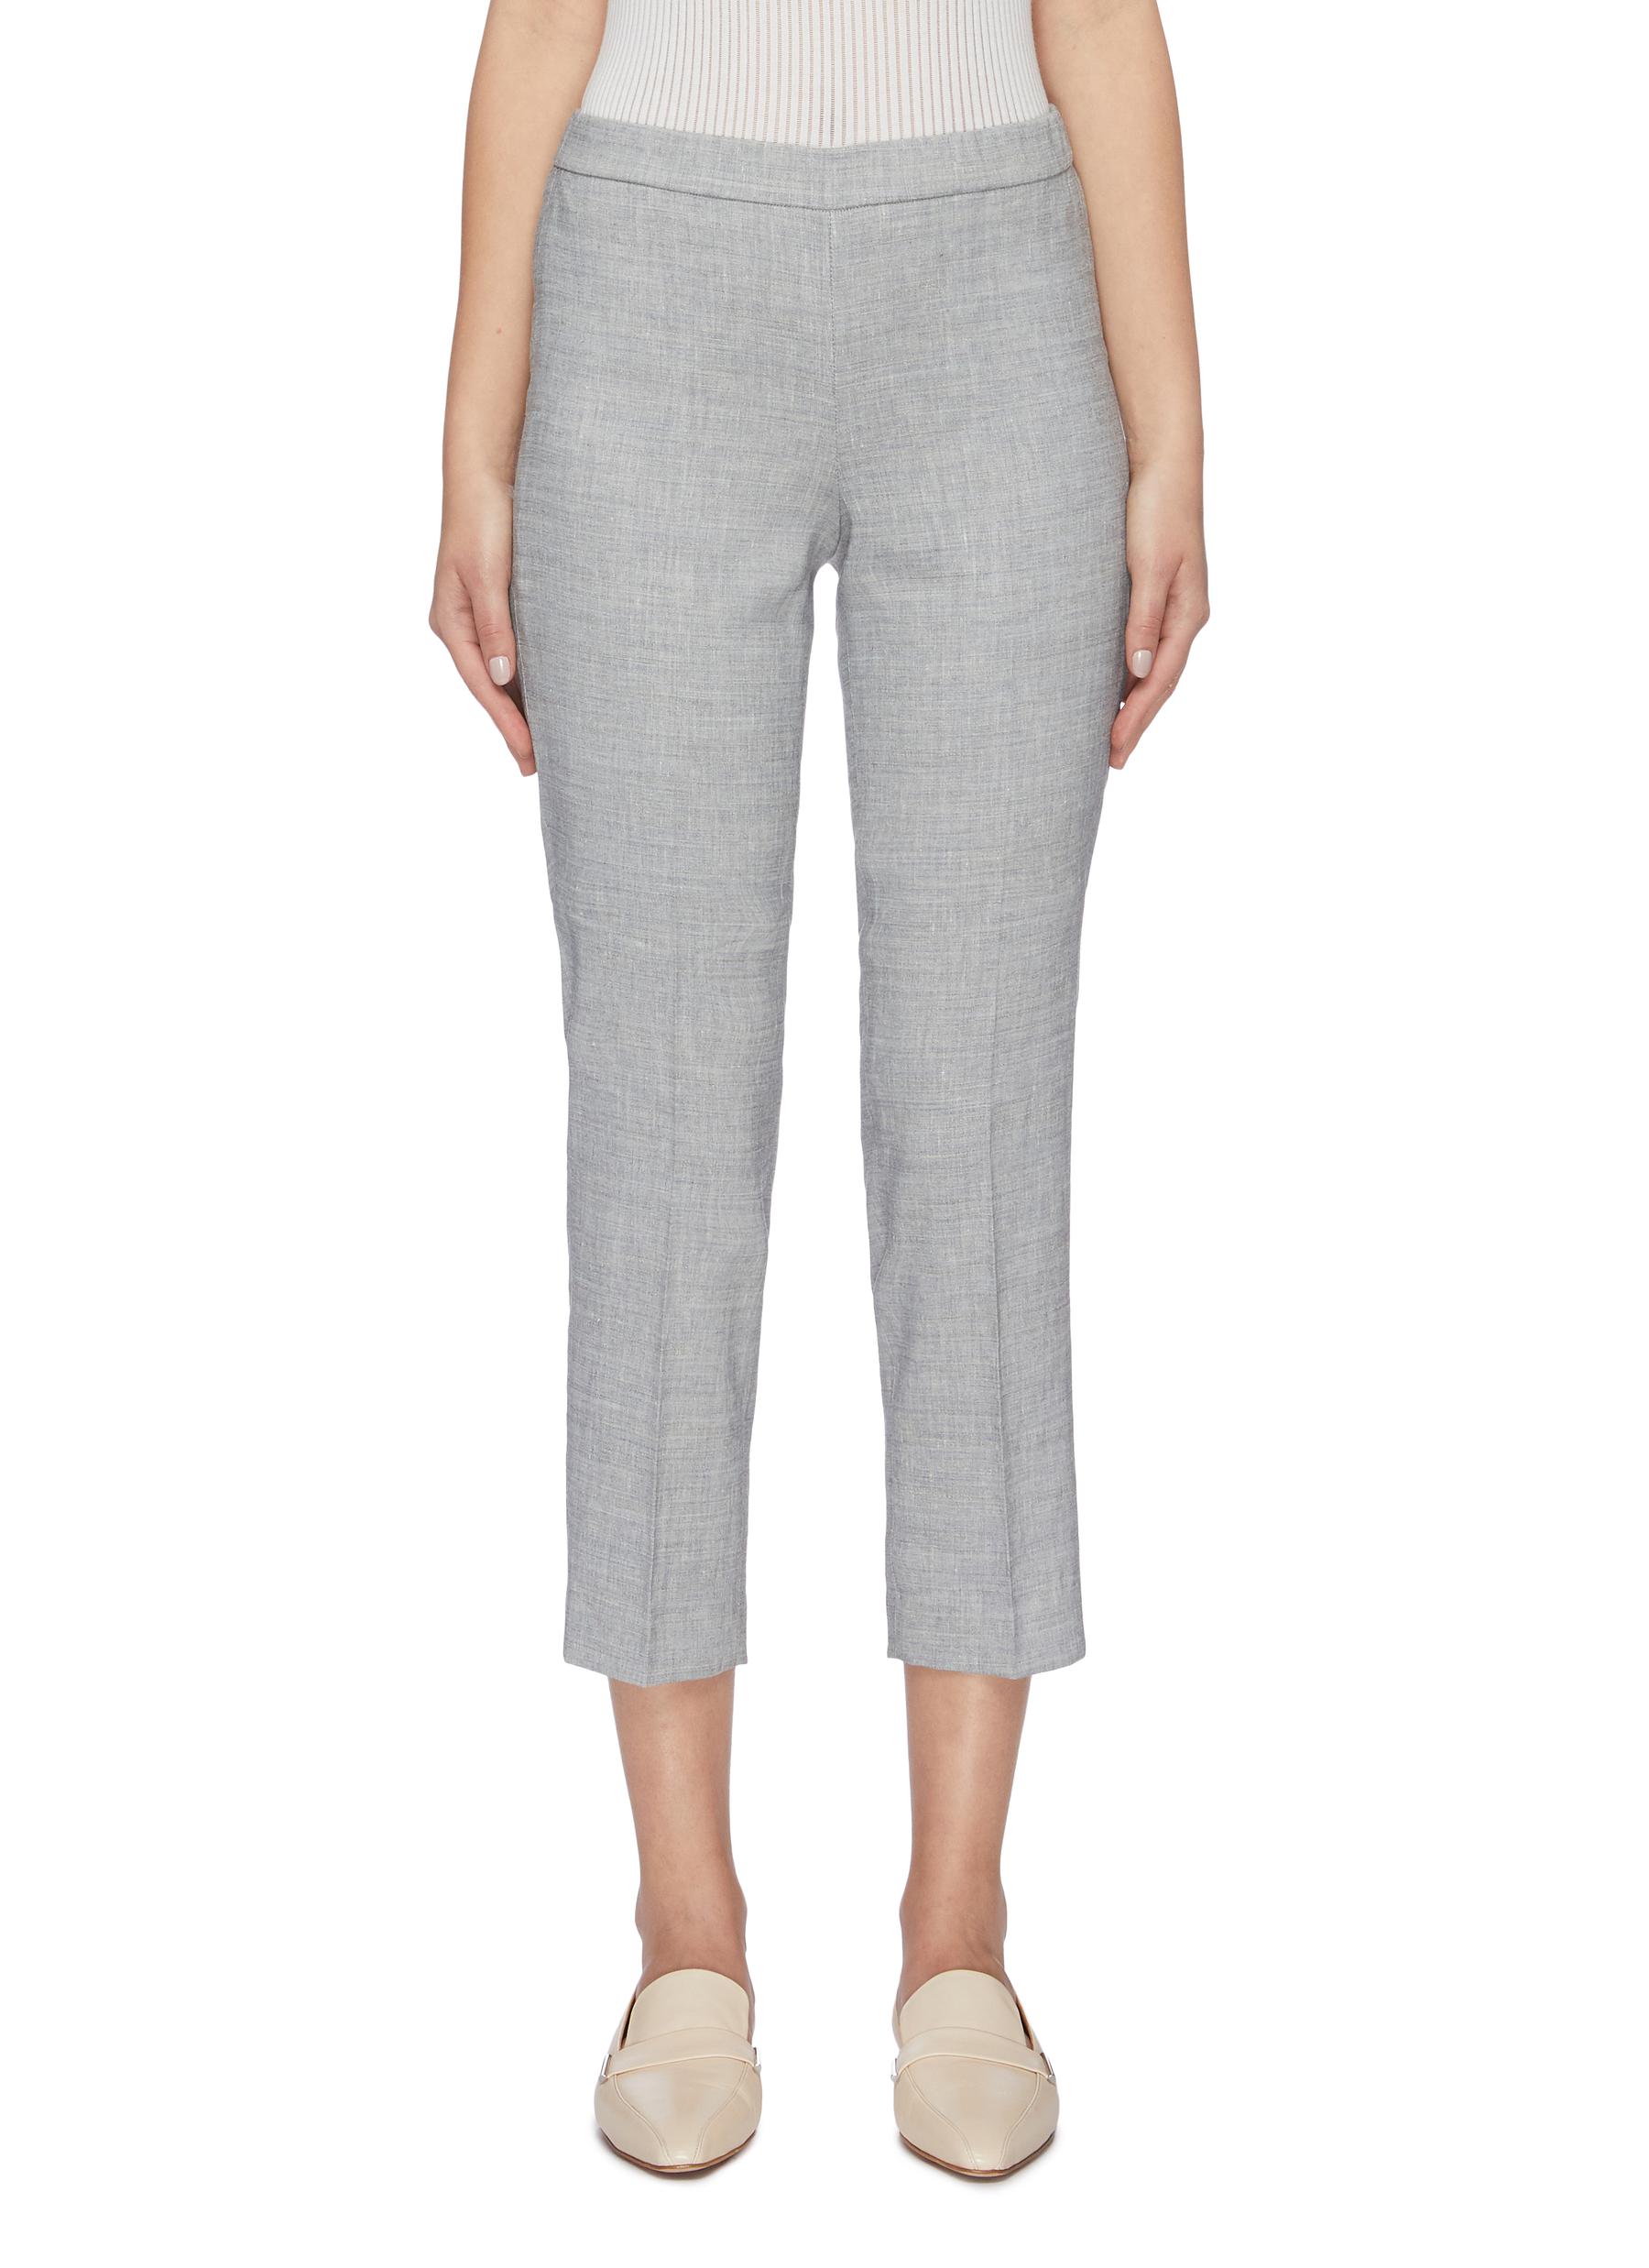 Basic Pull On linen blend pants by Theory